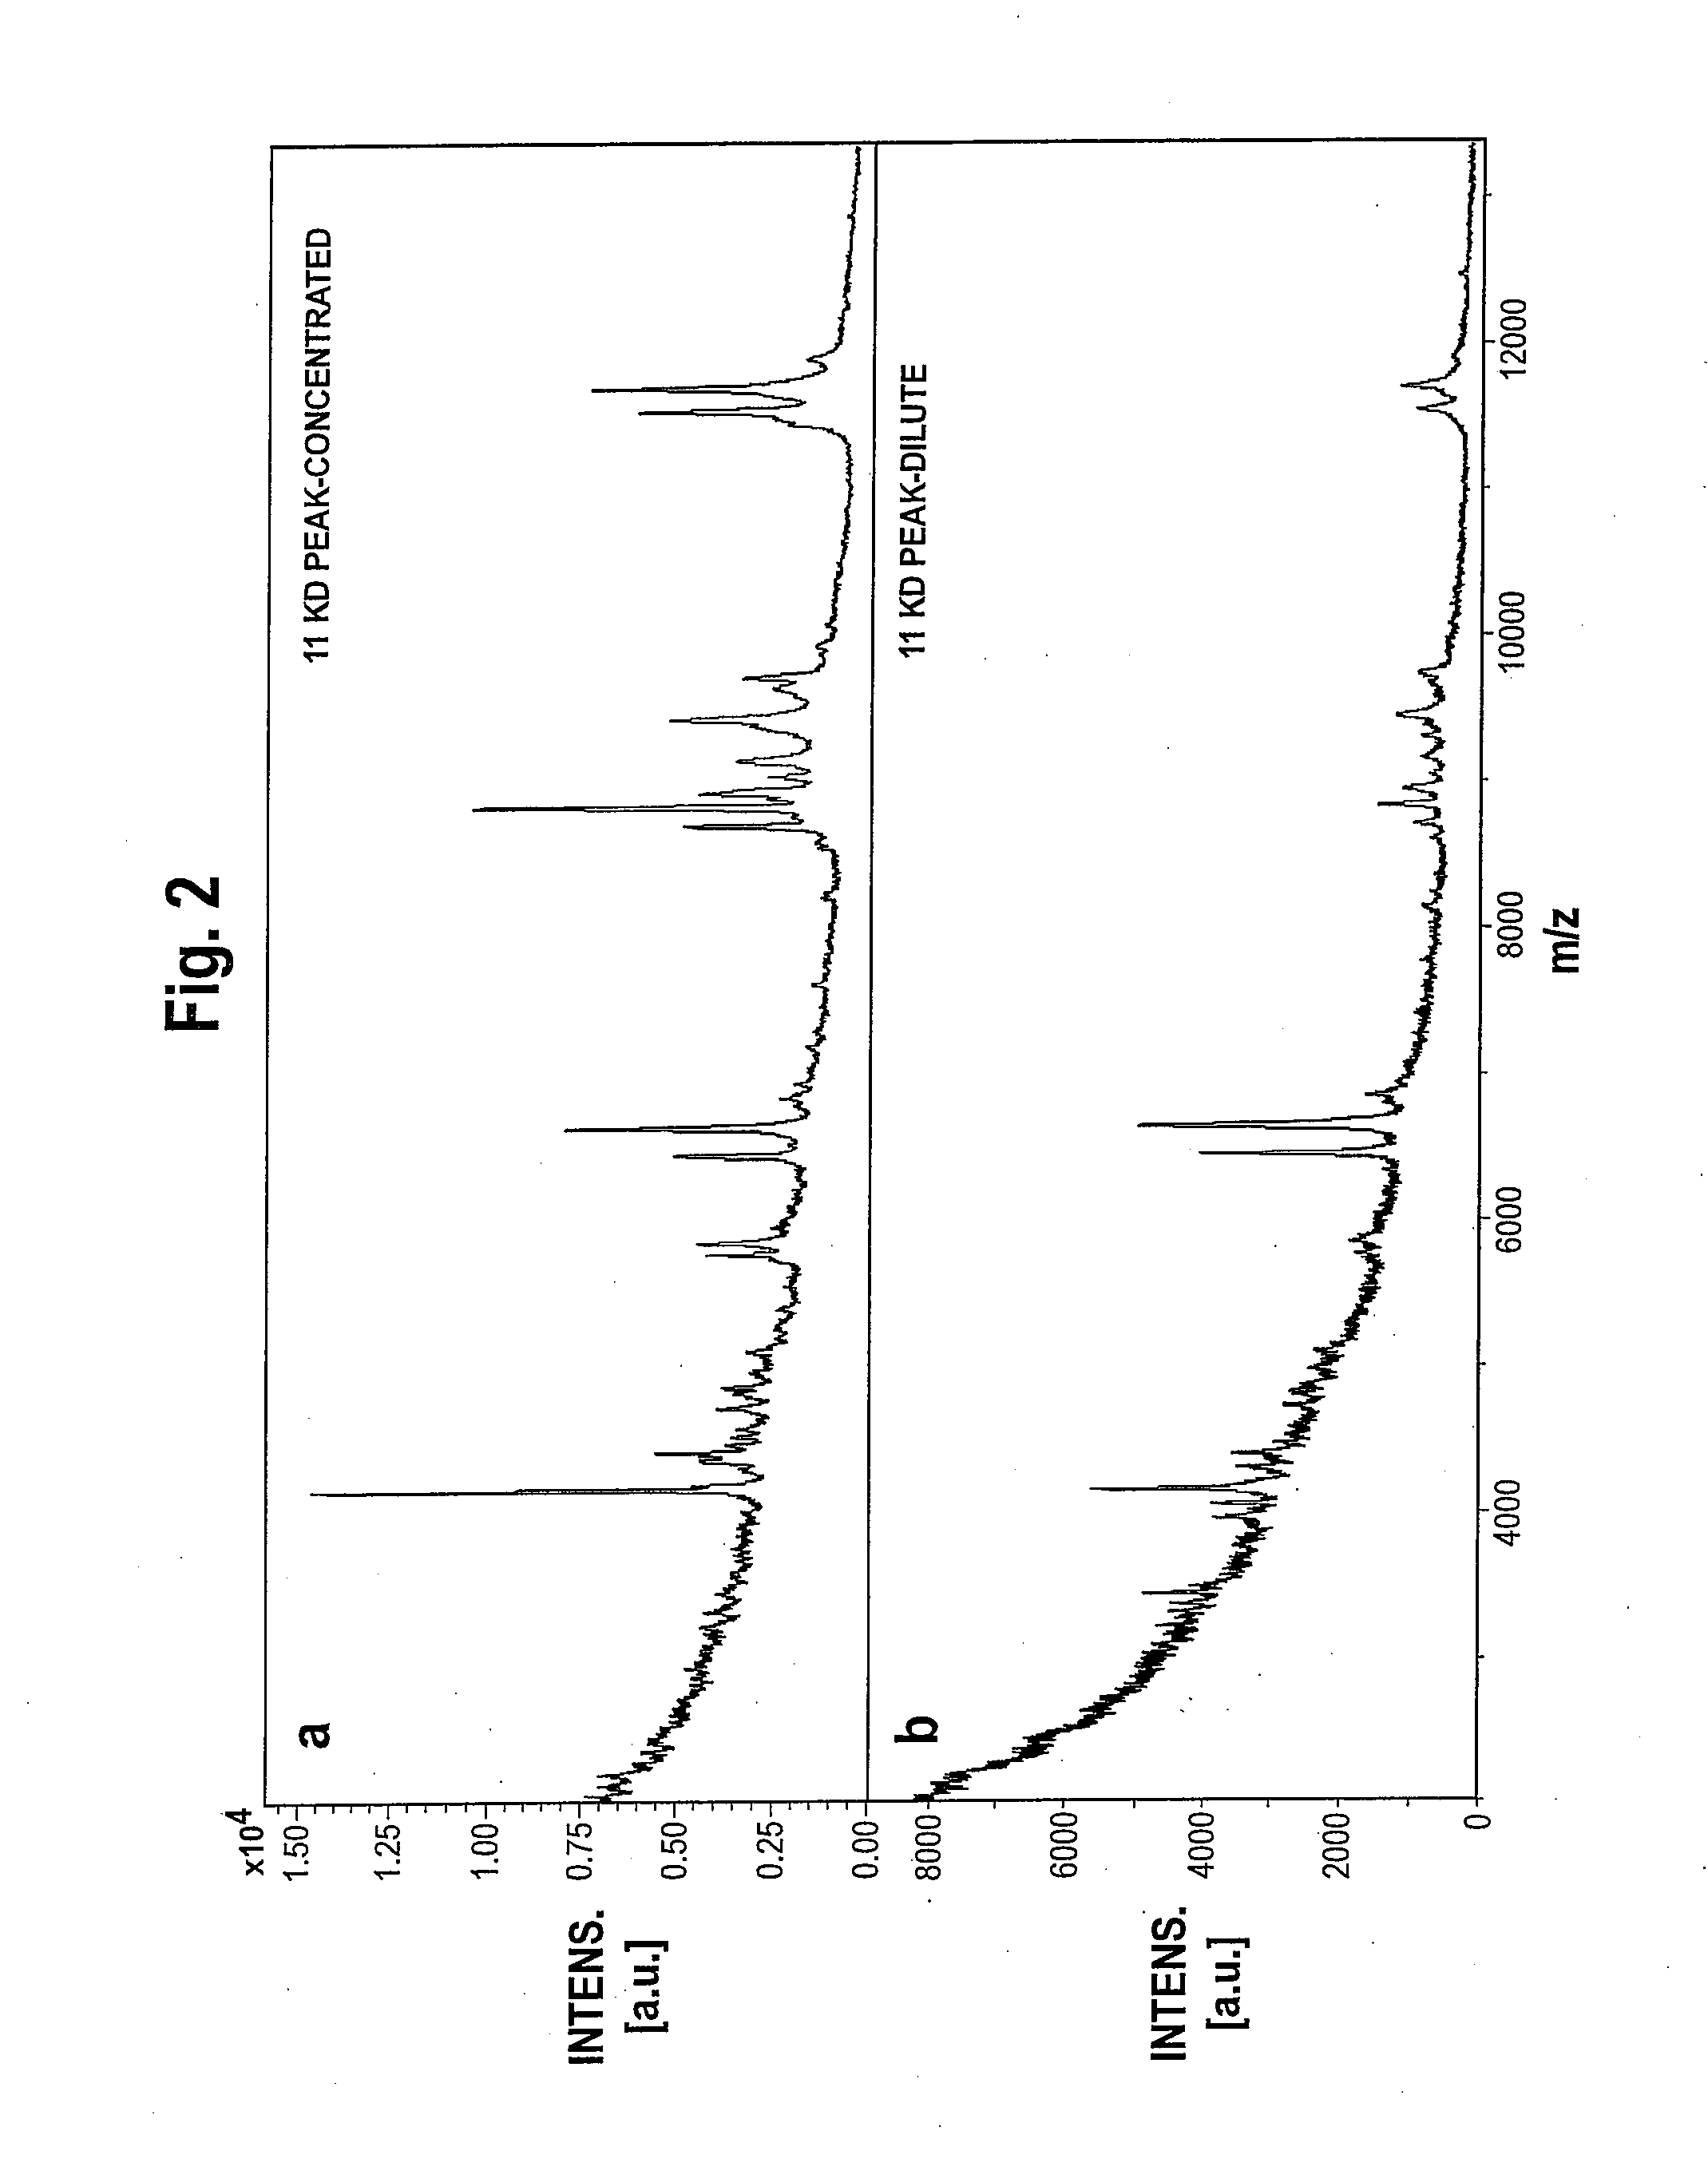 Weighted Scoring Methods and Use Thereof in Screening